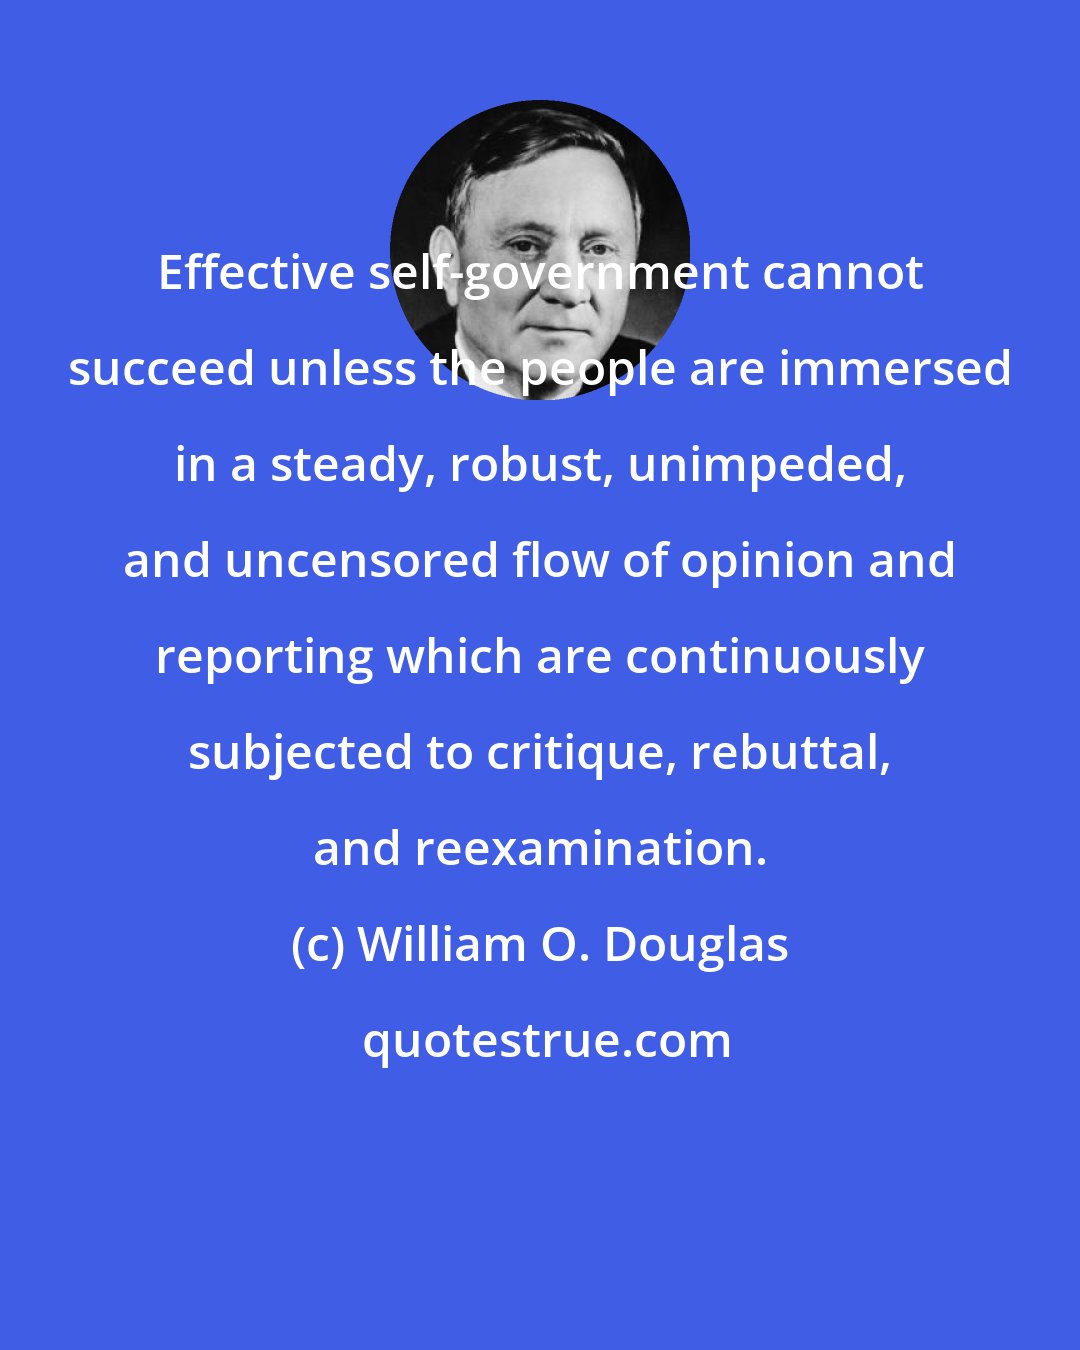 William O. Douglas: Effective self-government cannot succeed unless the people are immersed in a steady, robust, unimpeded, and uncensored flow of opinion and reporting which are continuously subjected to critique, rebuttal, and reexamination.